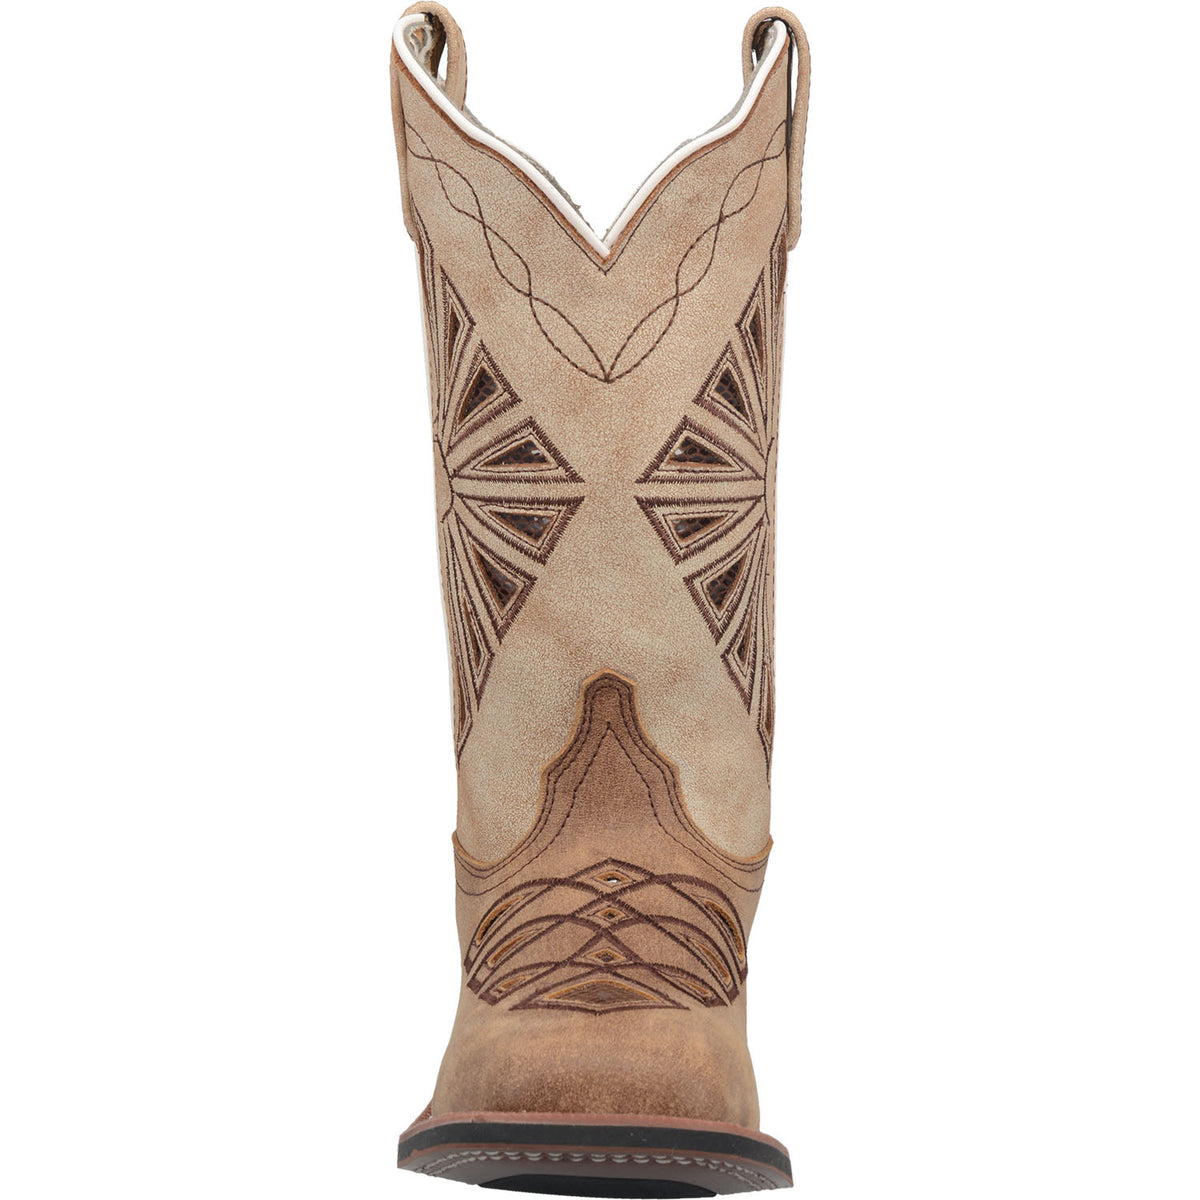 KITE DAYS LEATHER BOOT Cover